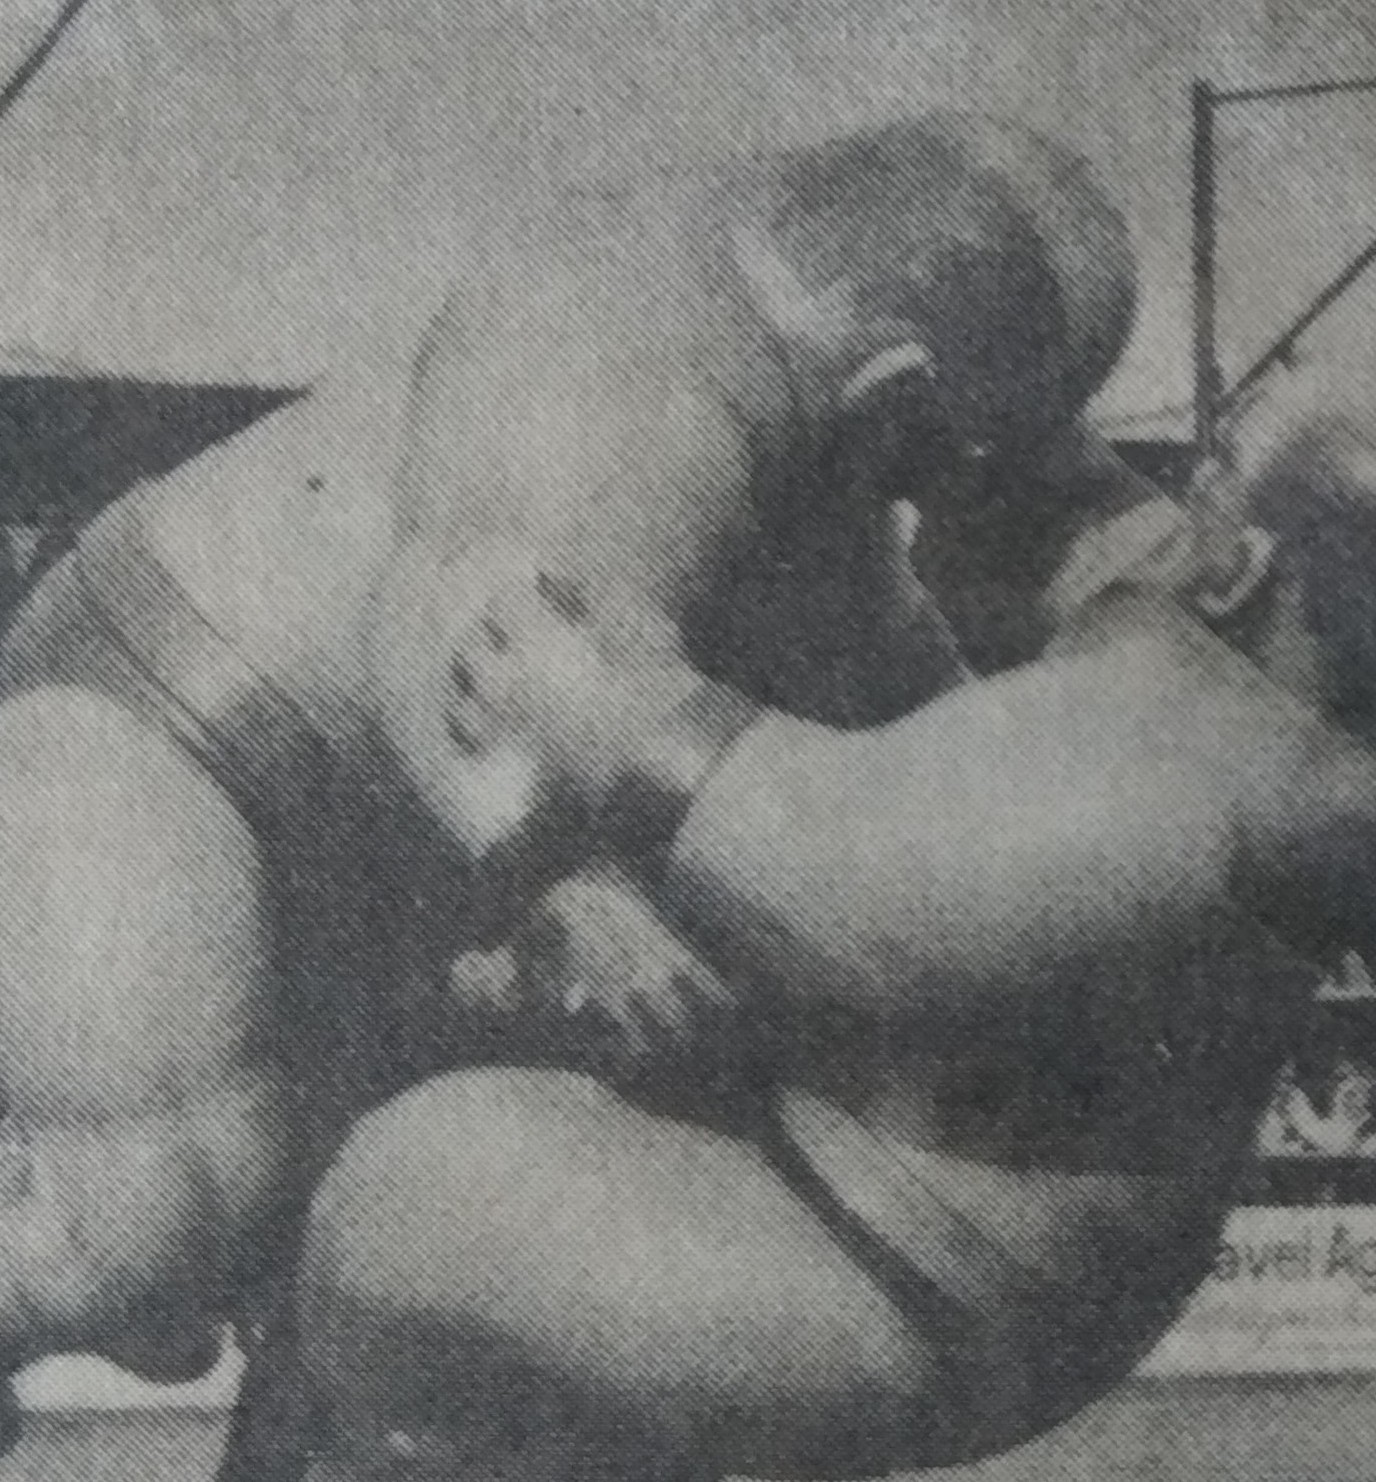 Mighty Mick and Terrible Ted, the Cumberland Giants, get to grips with each other in the Arena in 1979